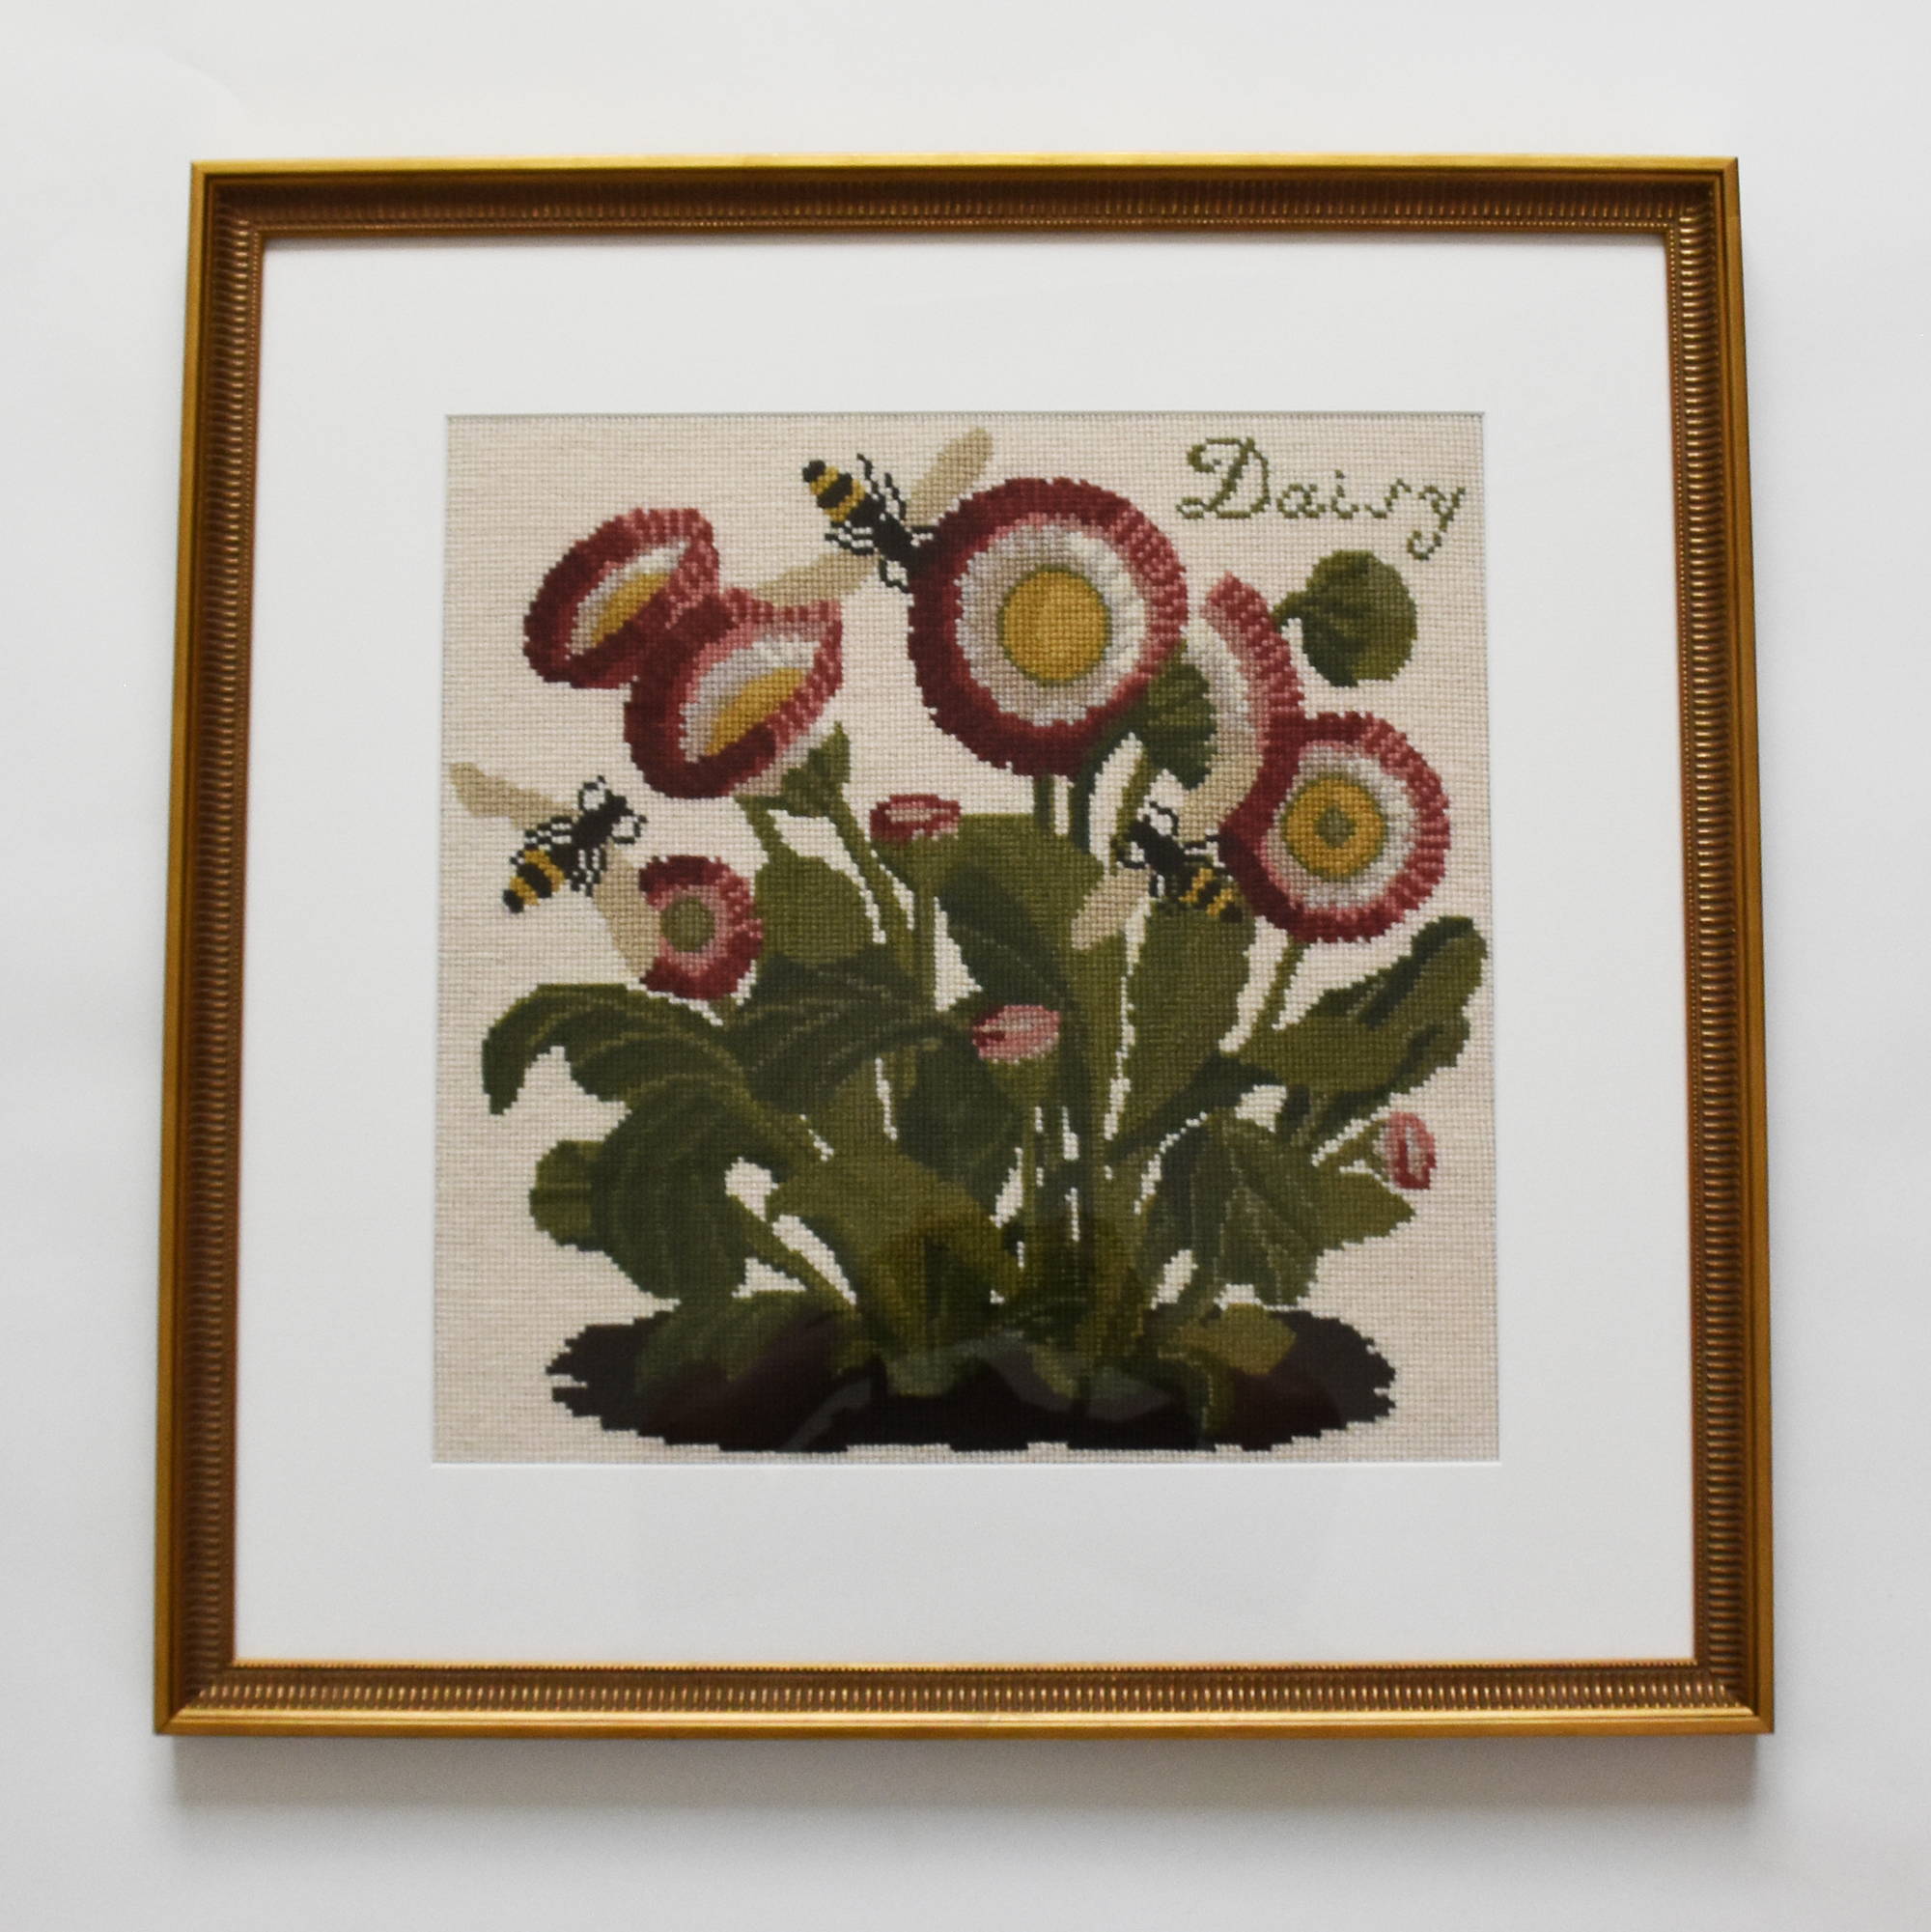 The Daisy Needlepoint kit framed with an antiqued gold frame